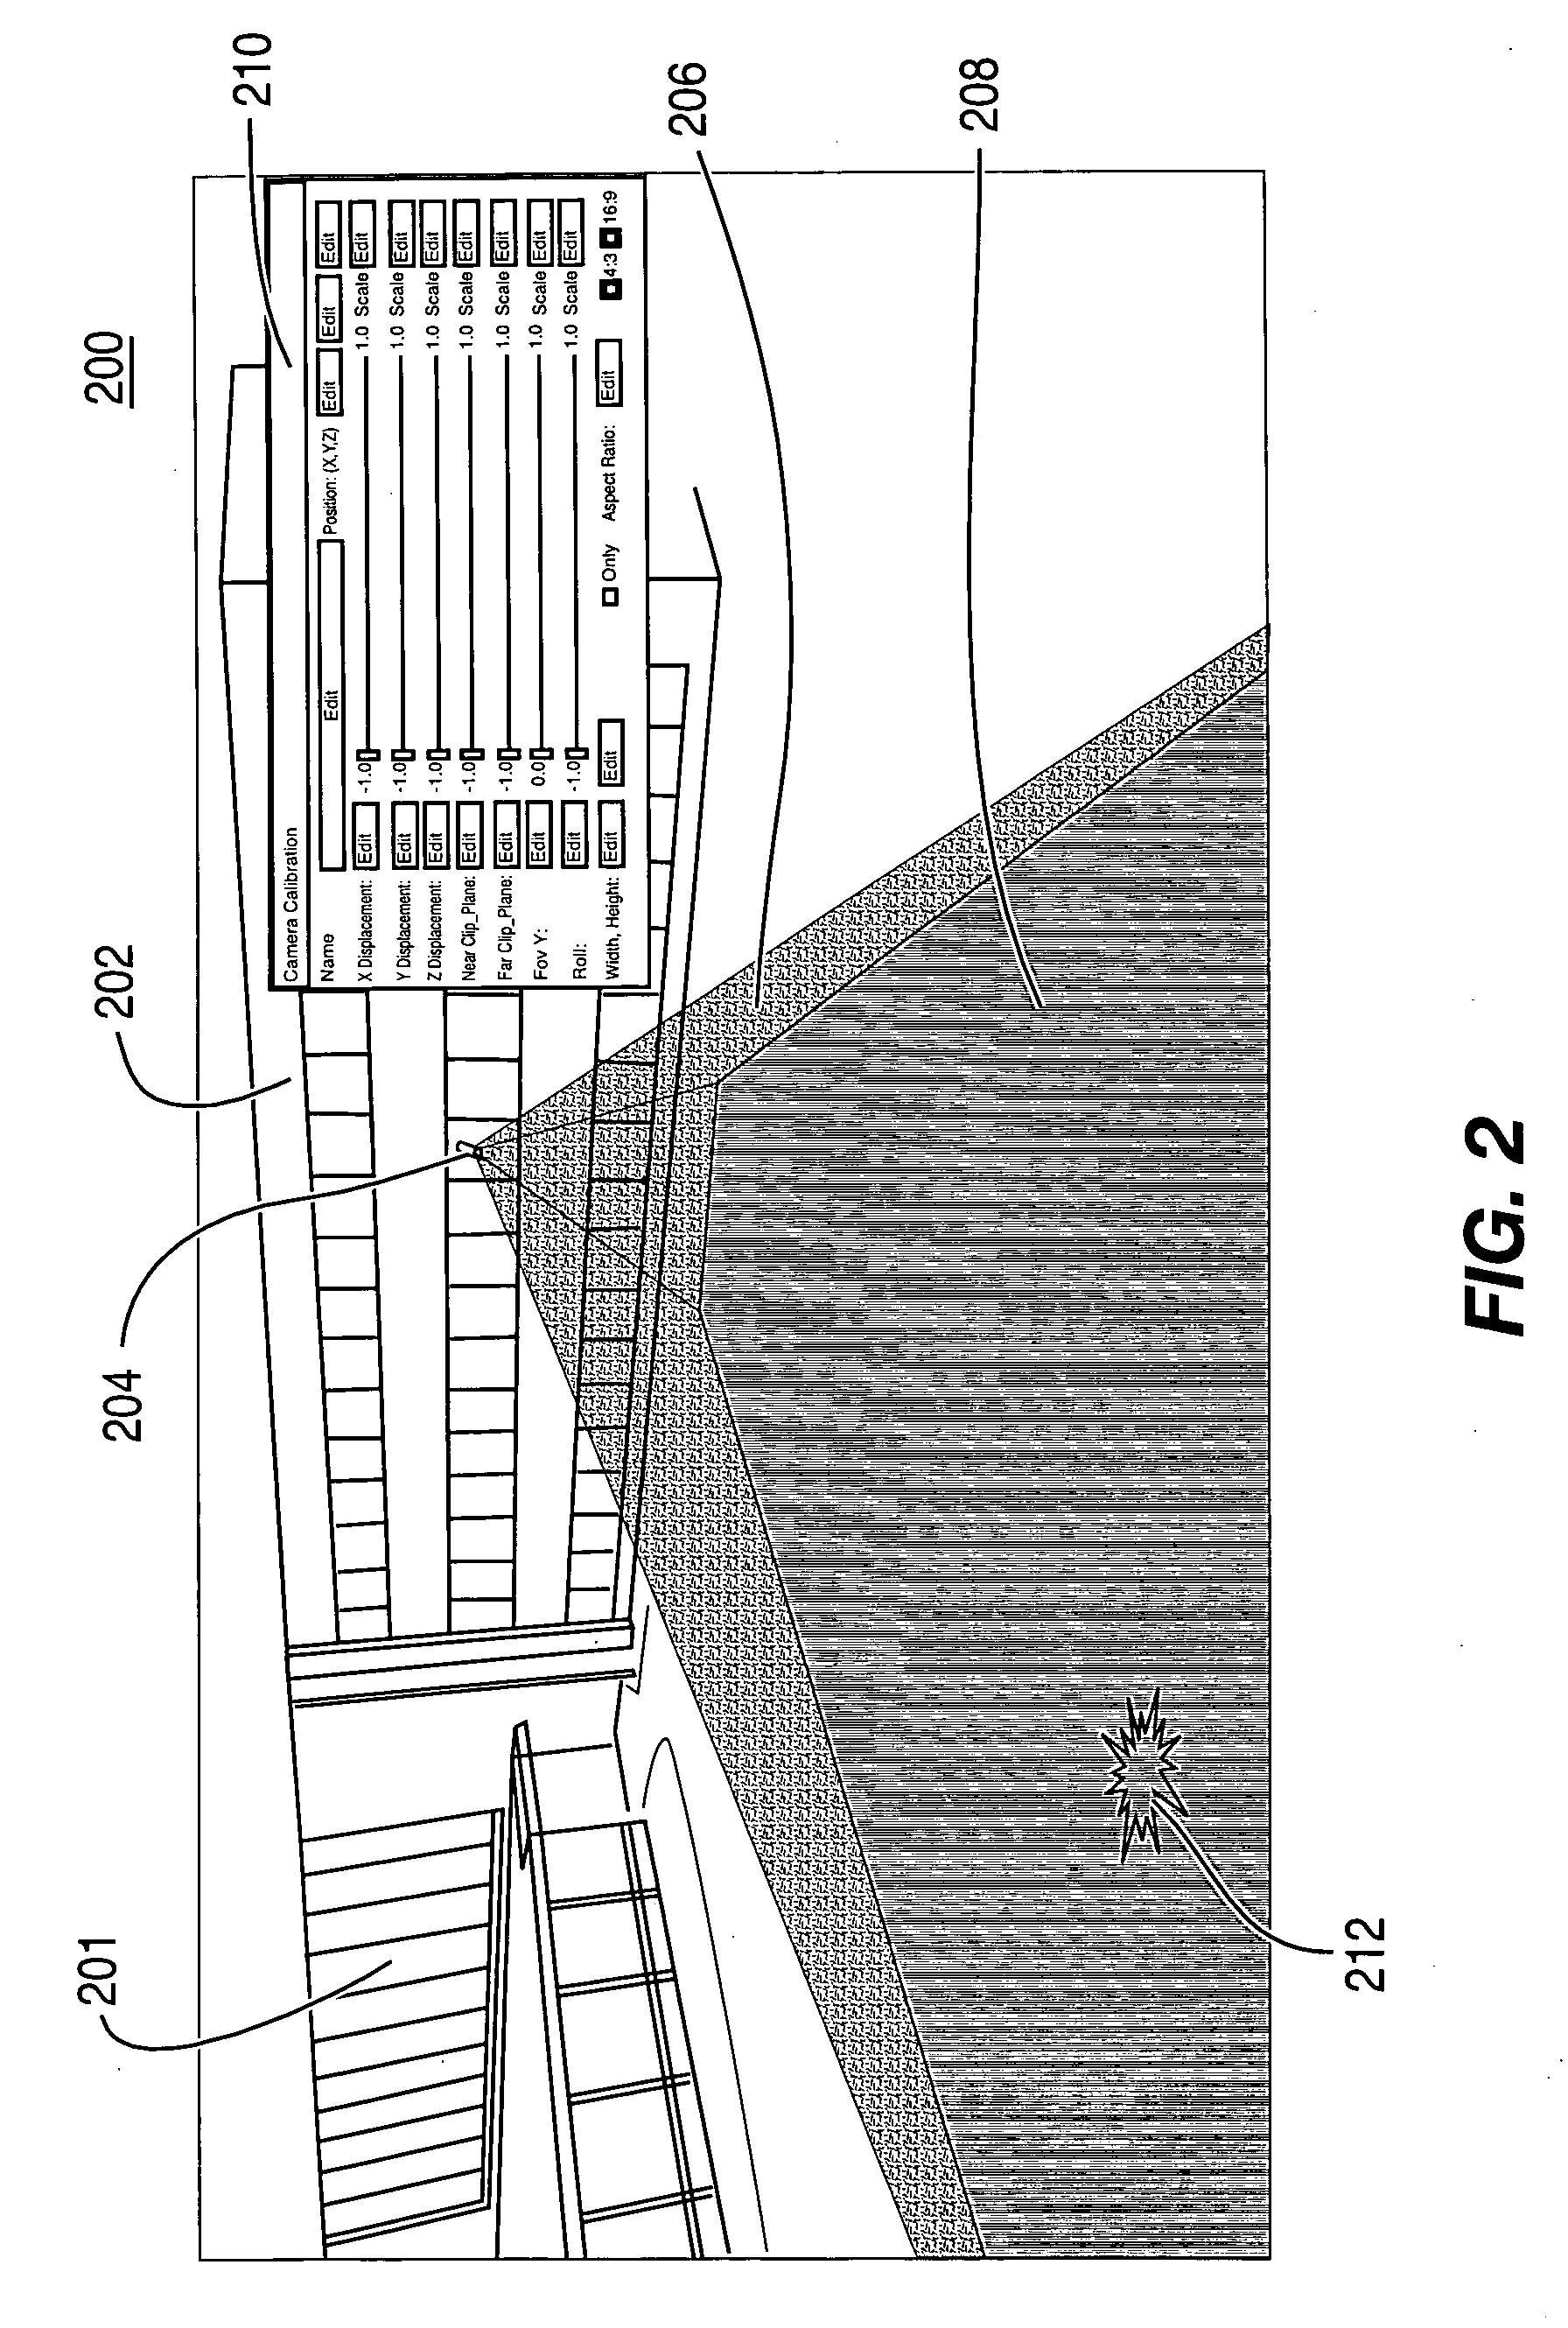 Method and apparatus for placing sensors using 3D models